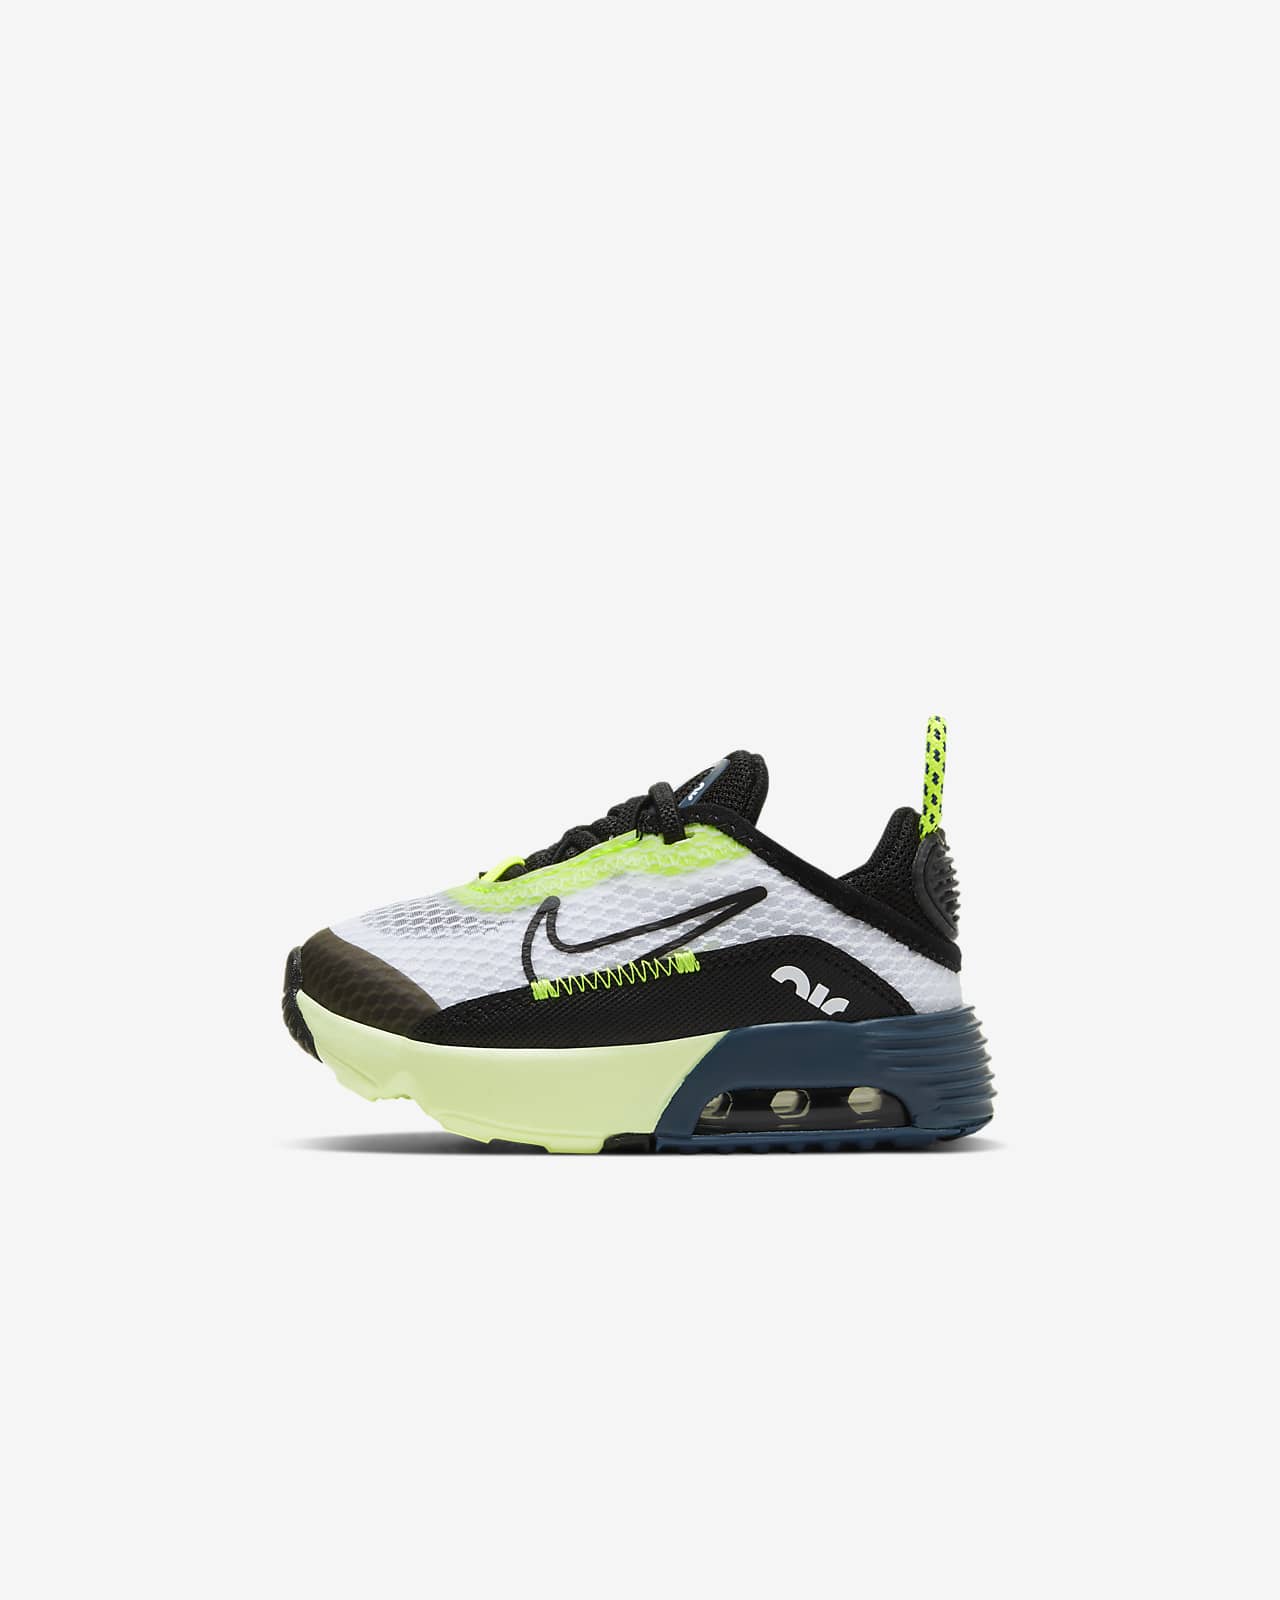 air max 2090 for running